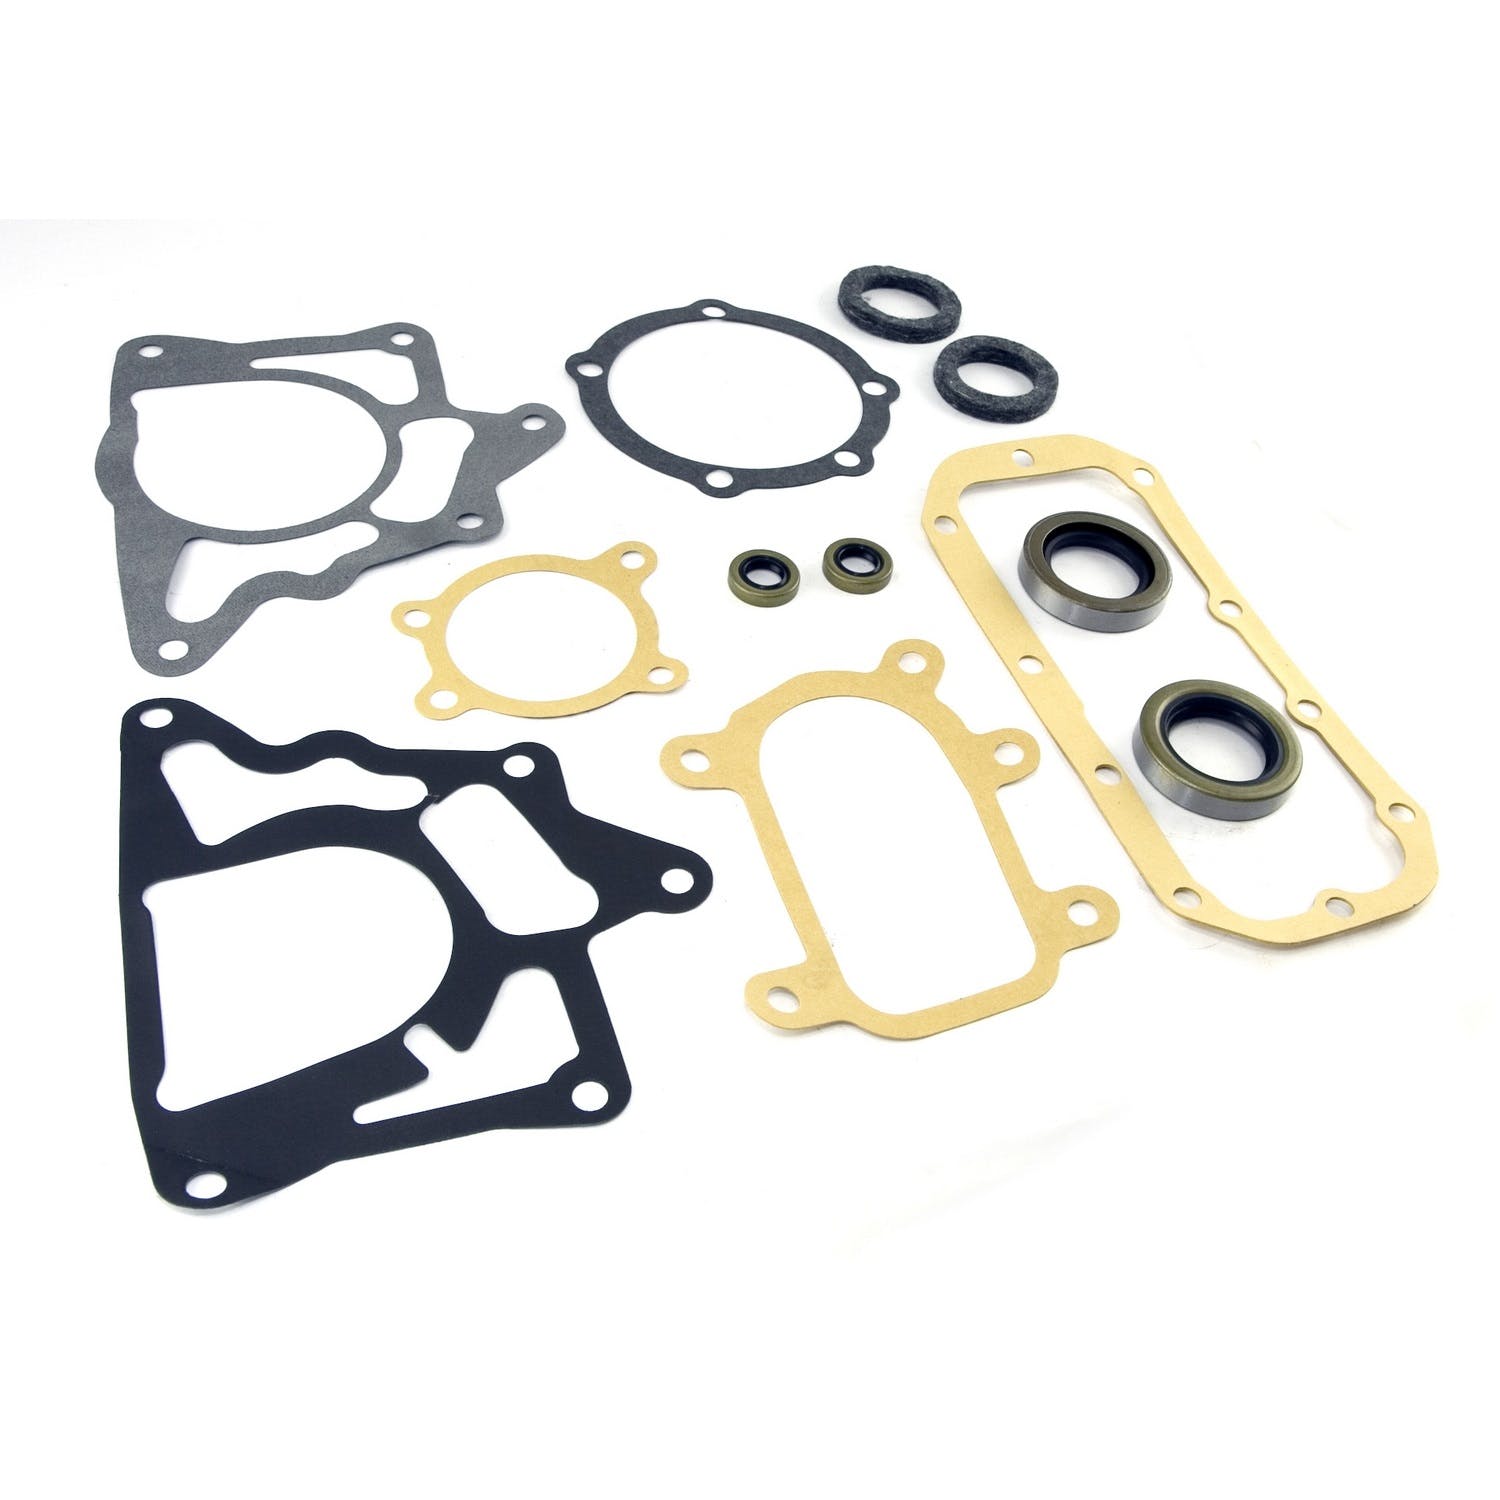 Omix-ADA 18603.01 Gasket and Seal Kit